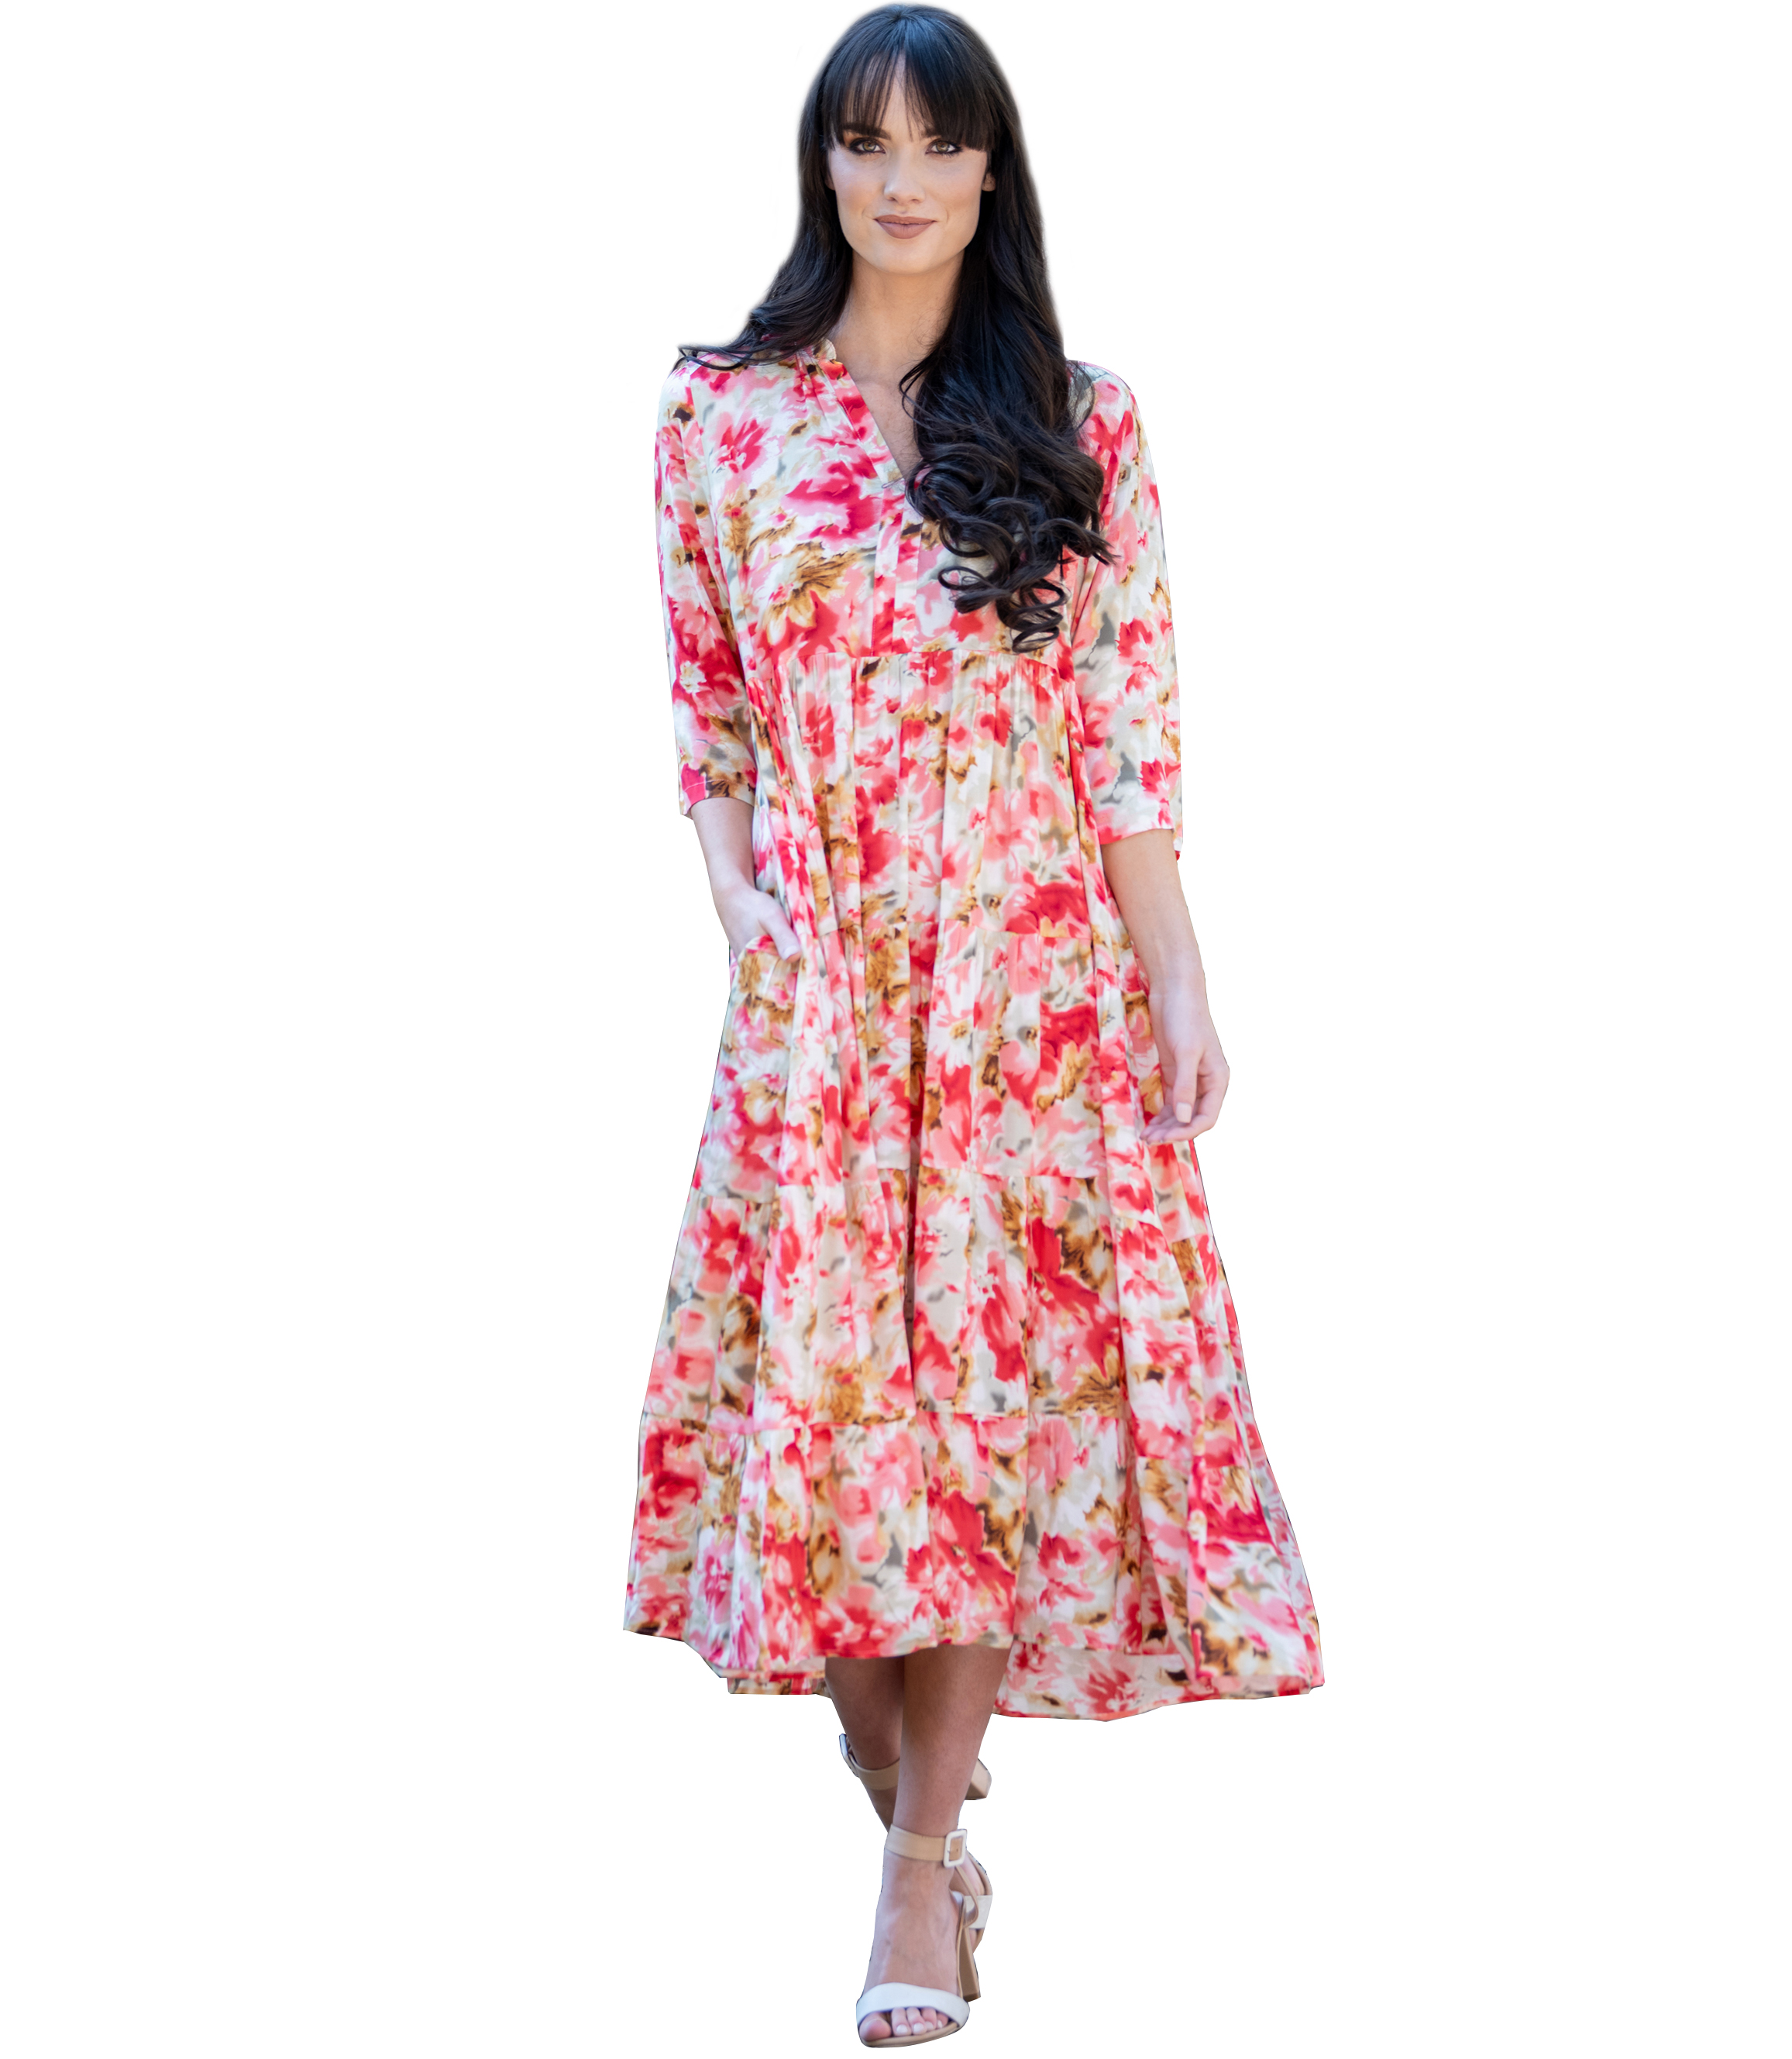 MASTIK PINK RED FLORAL DRESS | Rosella - Style inspired by elegance